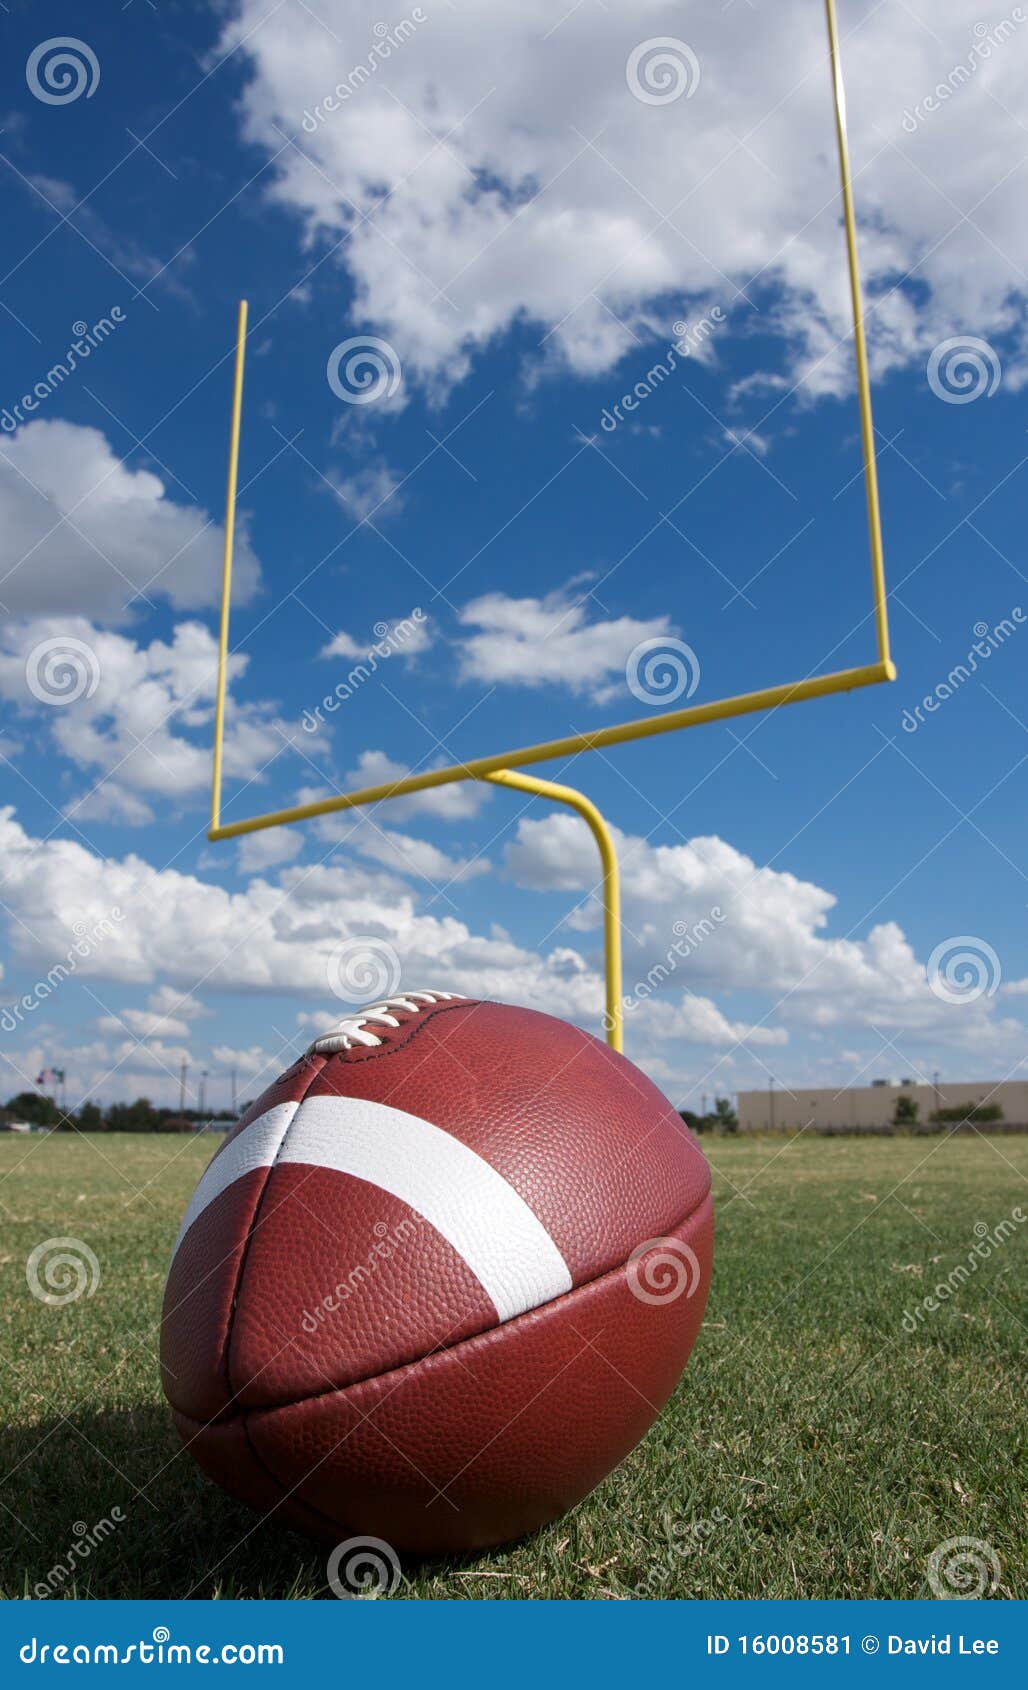 American Football with Goal Posts Stock Image - Image of sport, pigskin